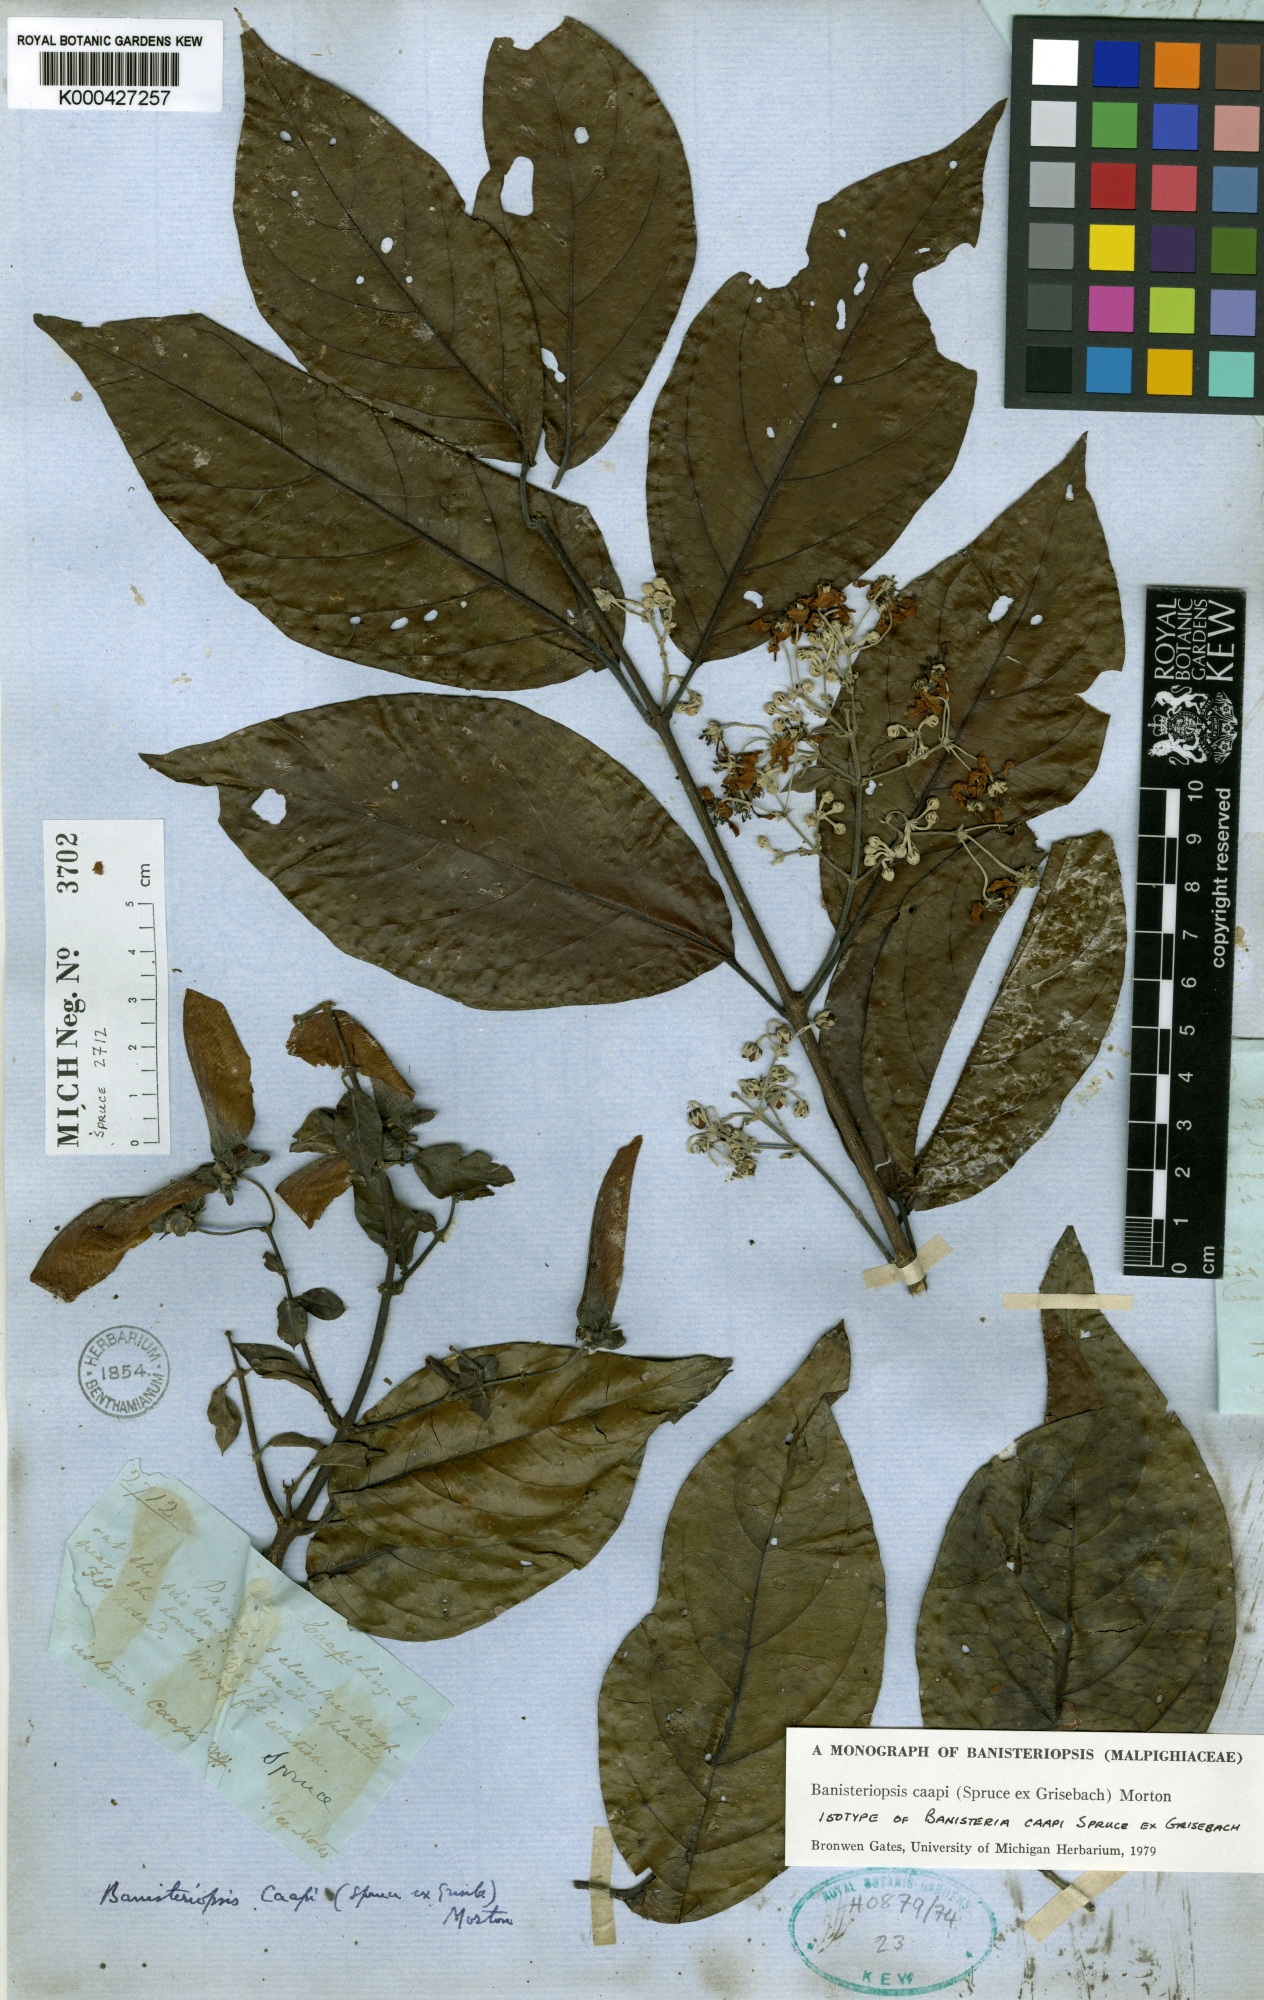 A specimen page for Banisteriopsis caapi featuring dried leaves and stems with flowers.